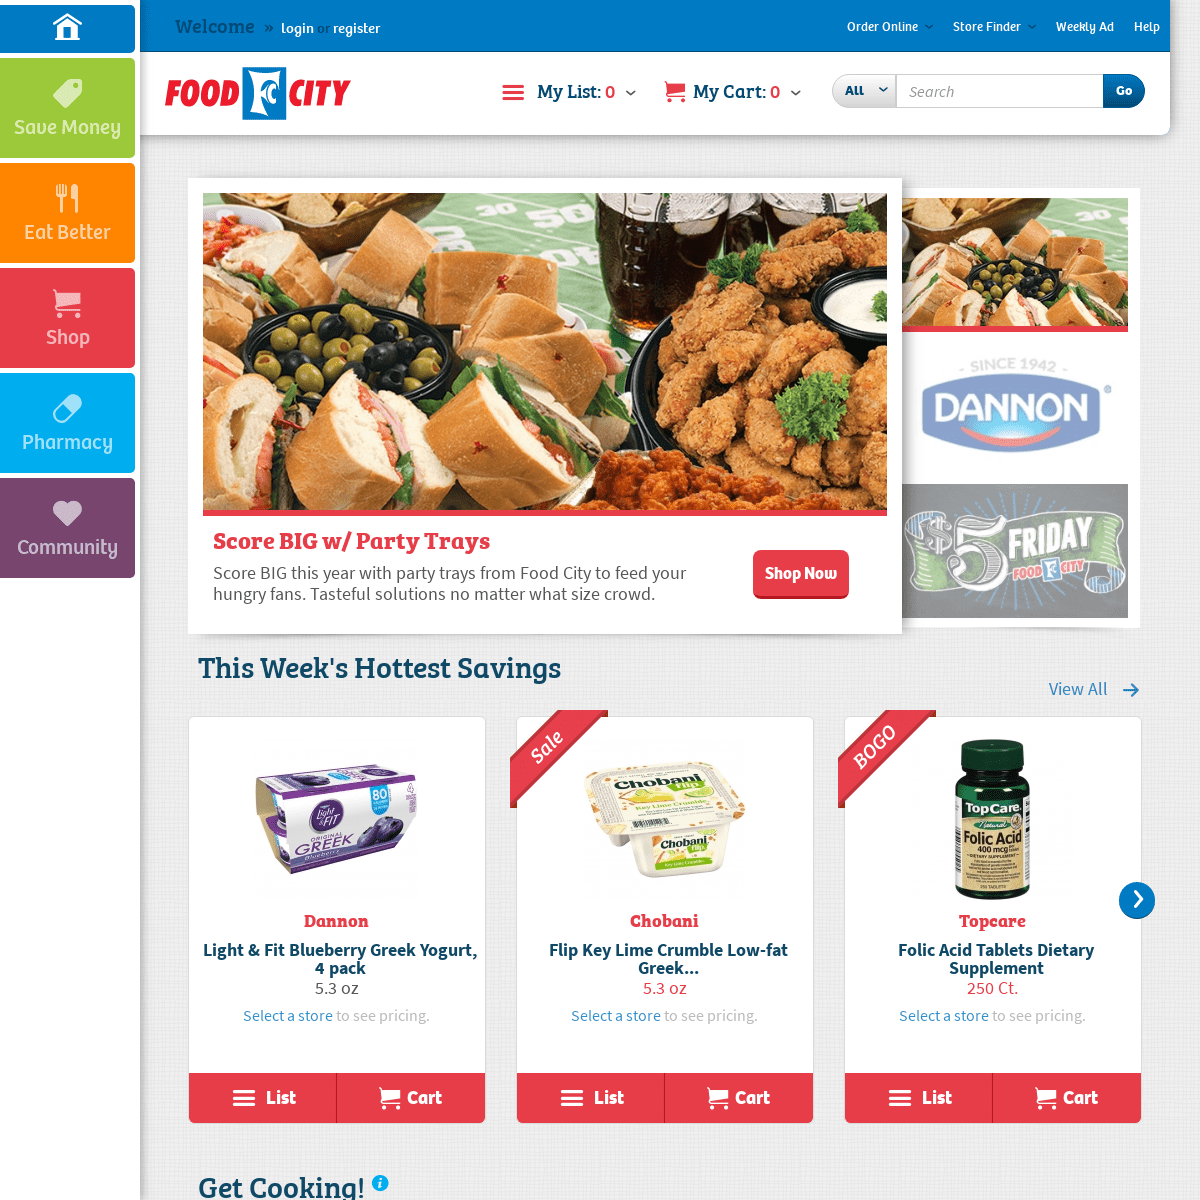 A complete backup of foodcity.com